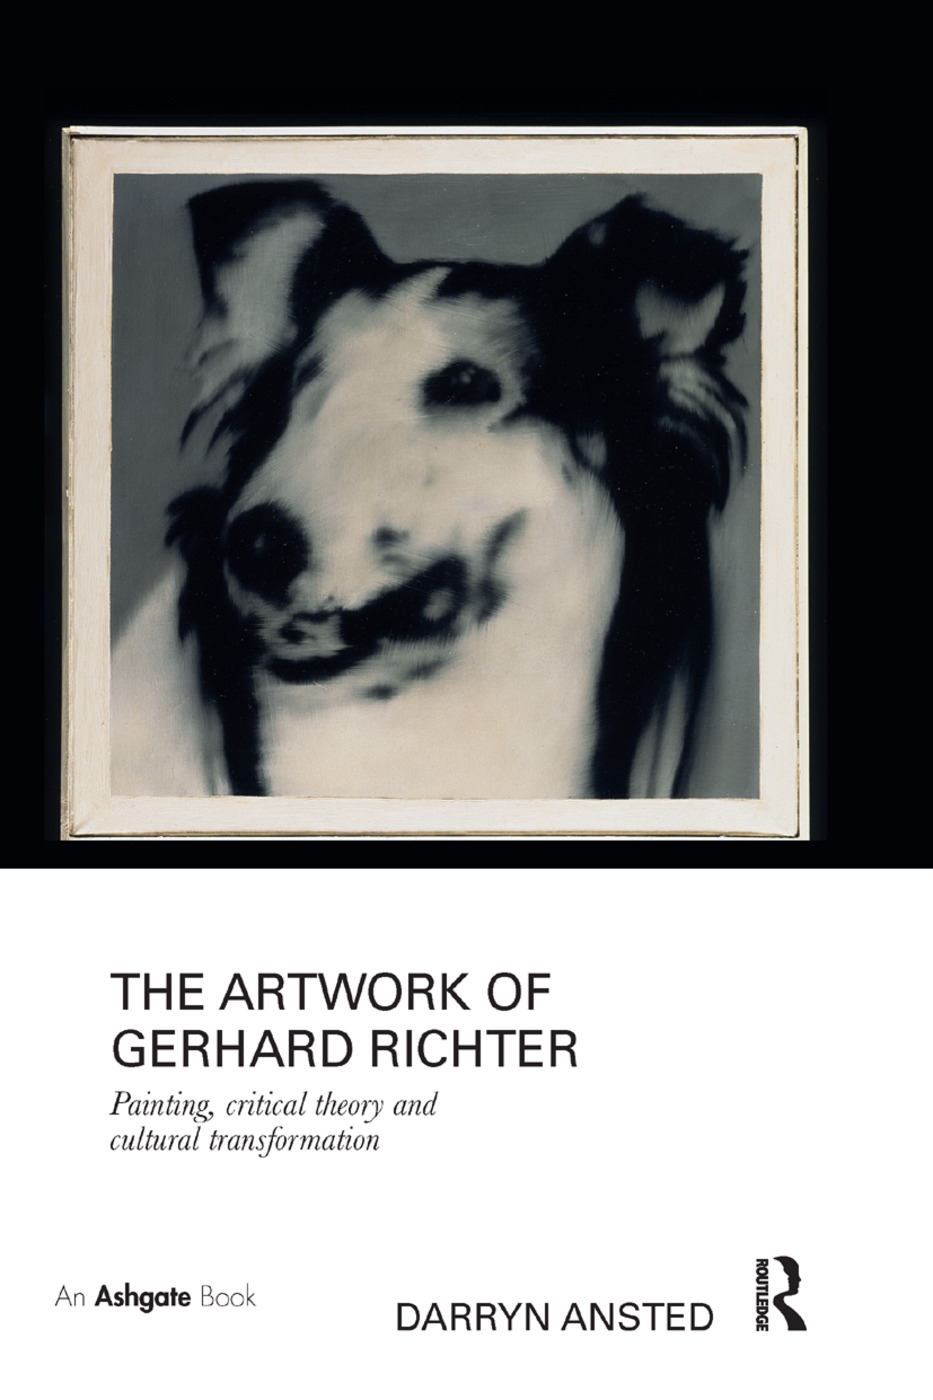 The Artwork of Gerhard Richter: Painting, Critical Theory and Cultural Transformation